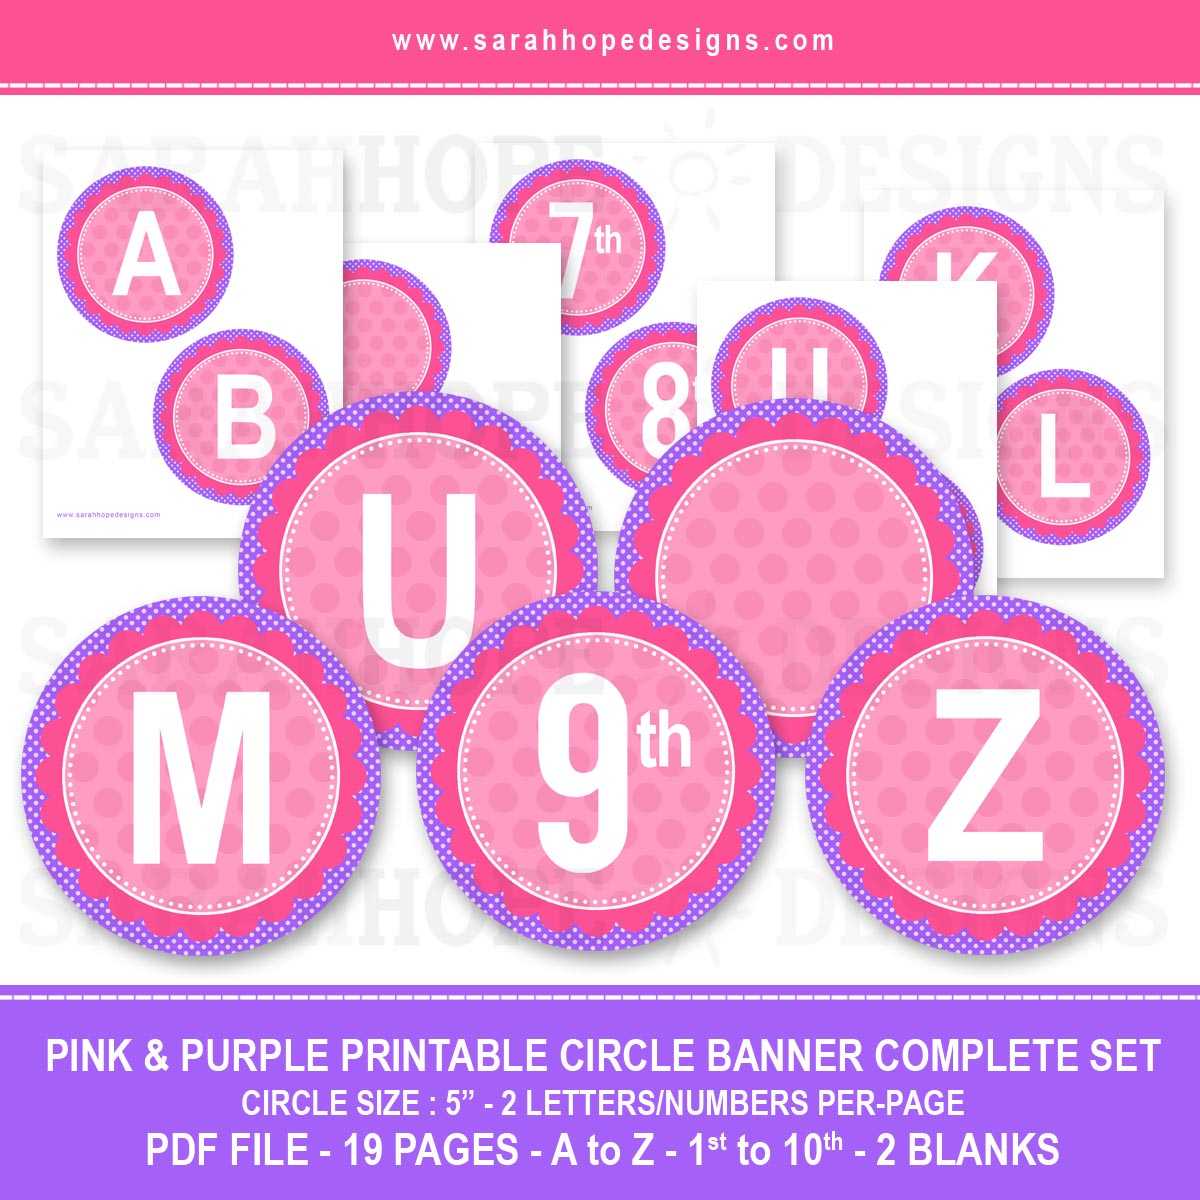 Spell Out Anything With These Free Alphabet Circle Banners Inside Free Letter Templates For Banners